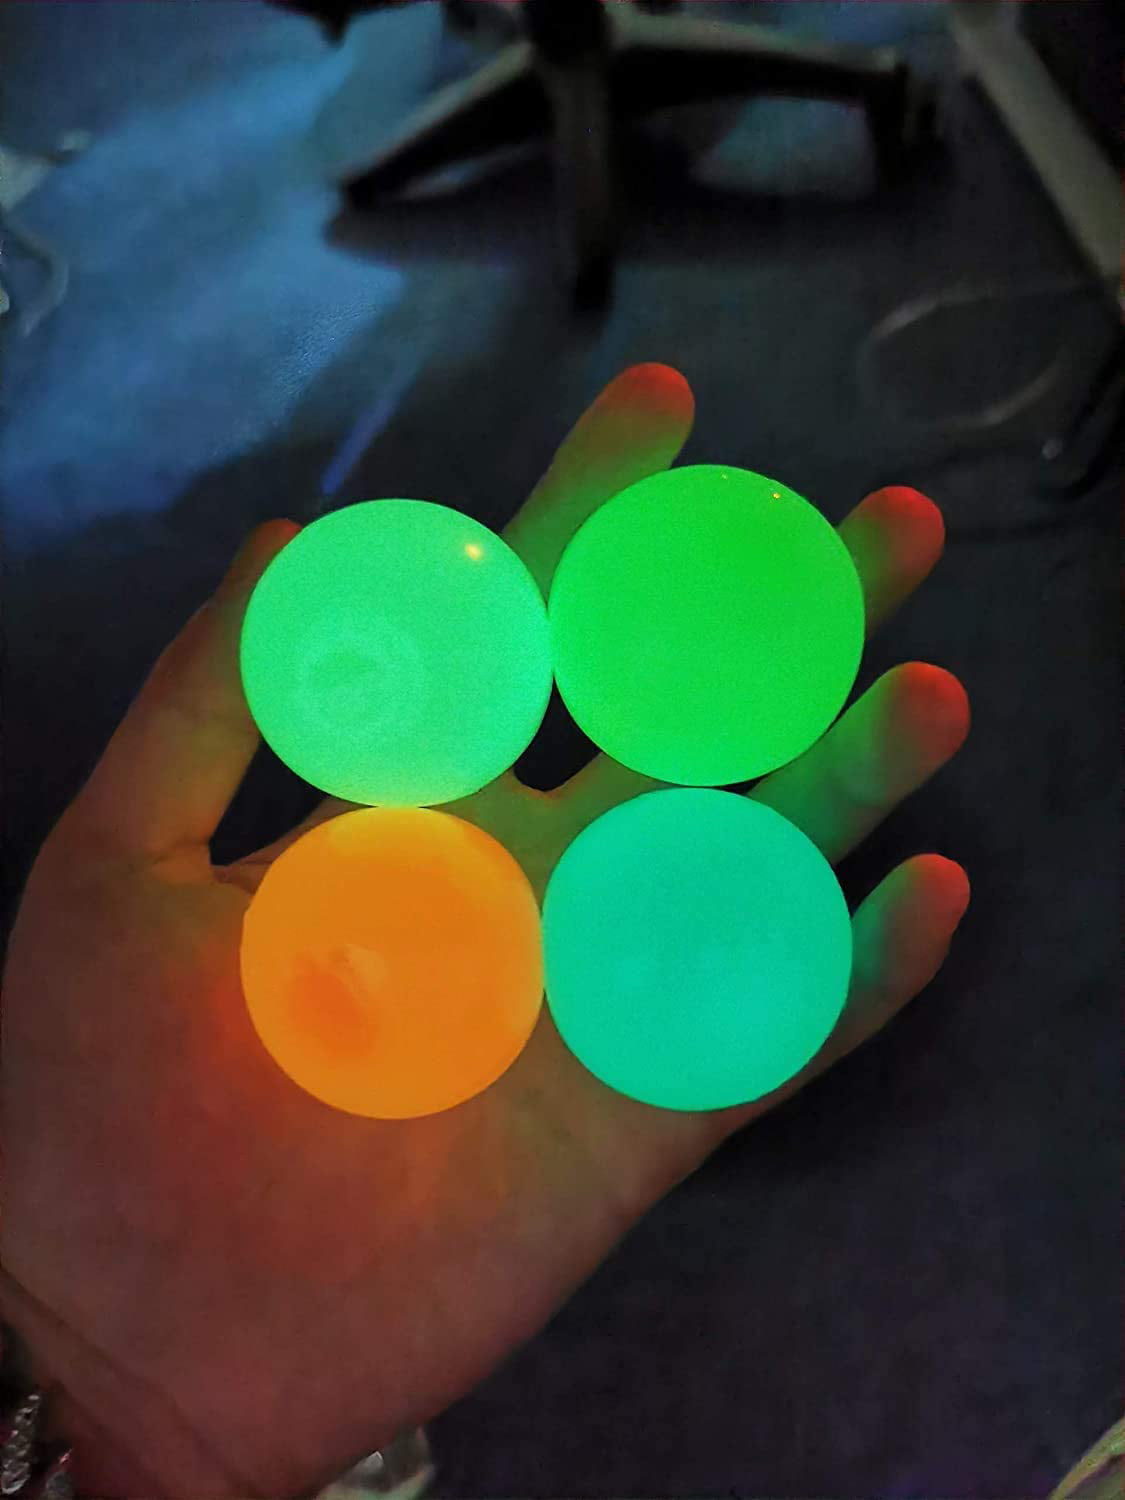 Squishy Glow Stress Relief Toys for Kids and Adults Tear-Resistant 4 Pcs Luminescent Glow Stress Relief Balls Sticky Ball OCD Non-Toxic Fun Toy for ADHD Anxiety